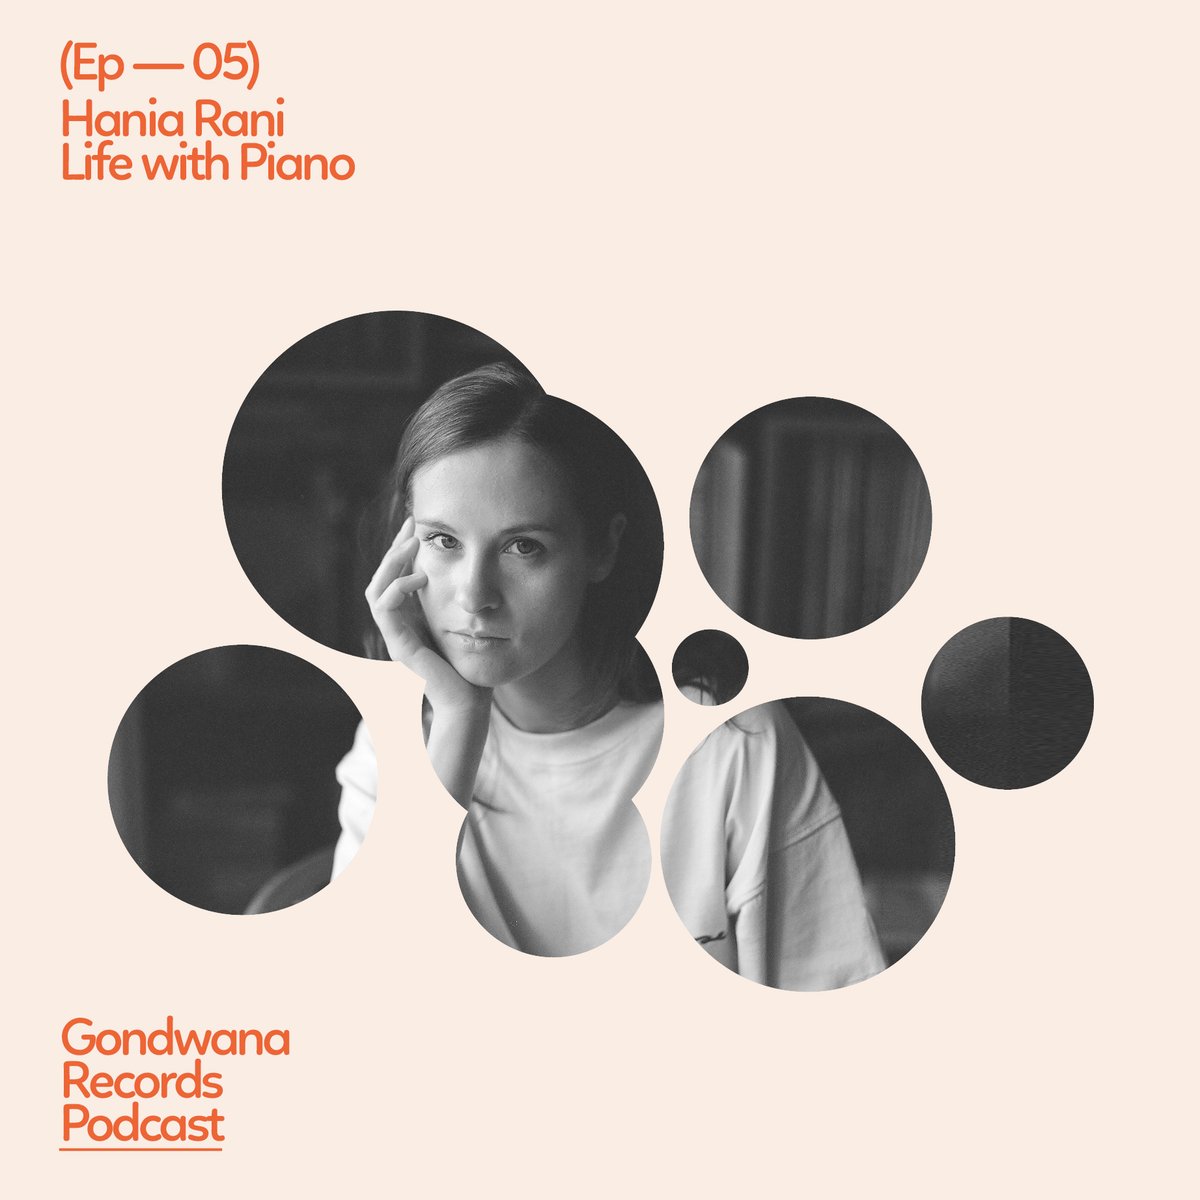 Episode 5 of the @gondwanarecords podcast is out now! Join me and Mari* as we talk through stories of my musical childhood, finding my sound between Warsaw and Berlin, and sending my demos to Gondwana. Listen to the podcast here: gondwana.lnk.to/podcast